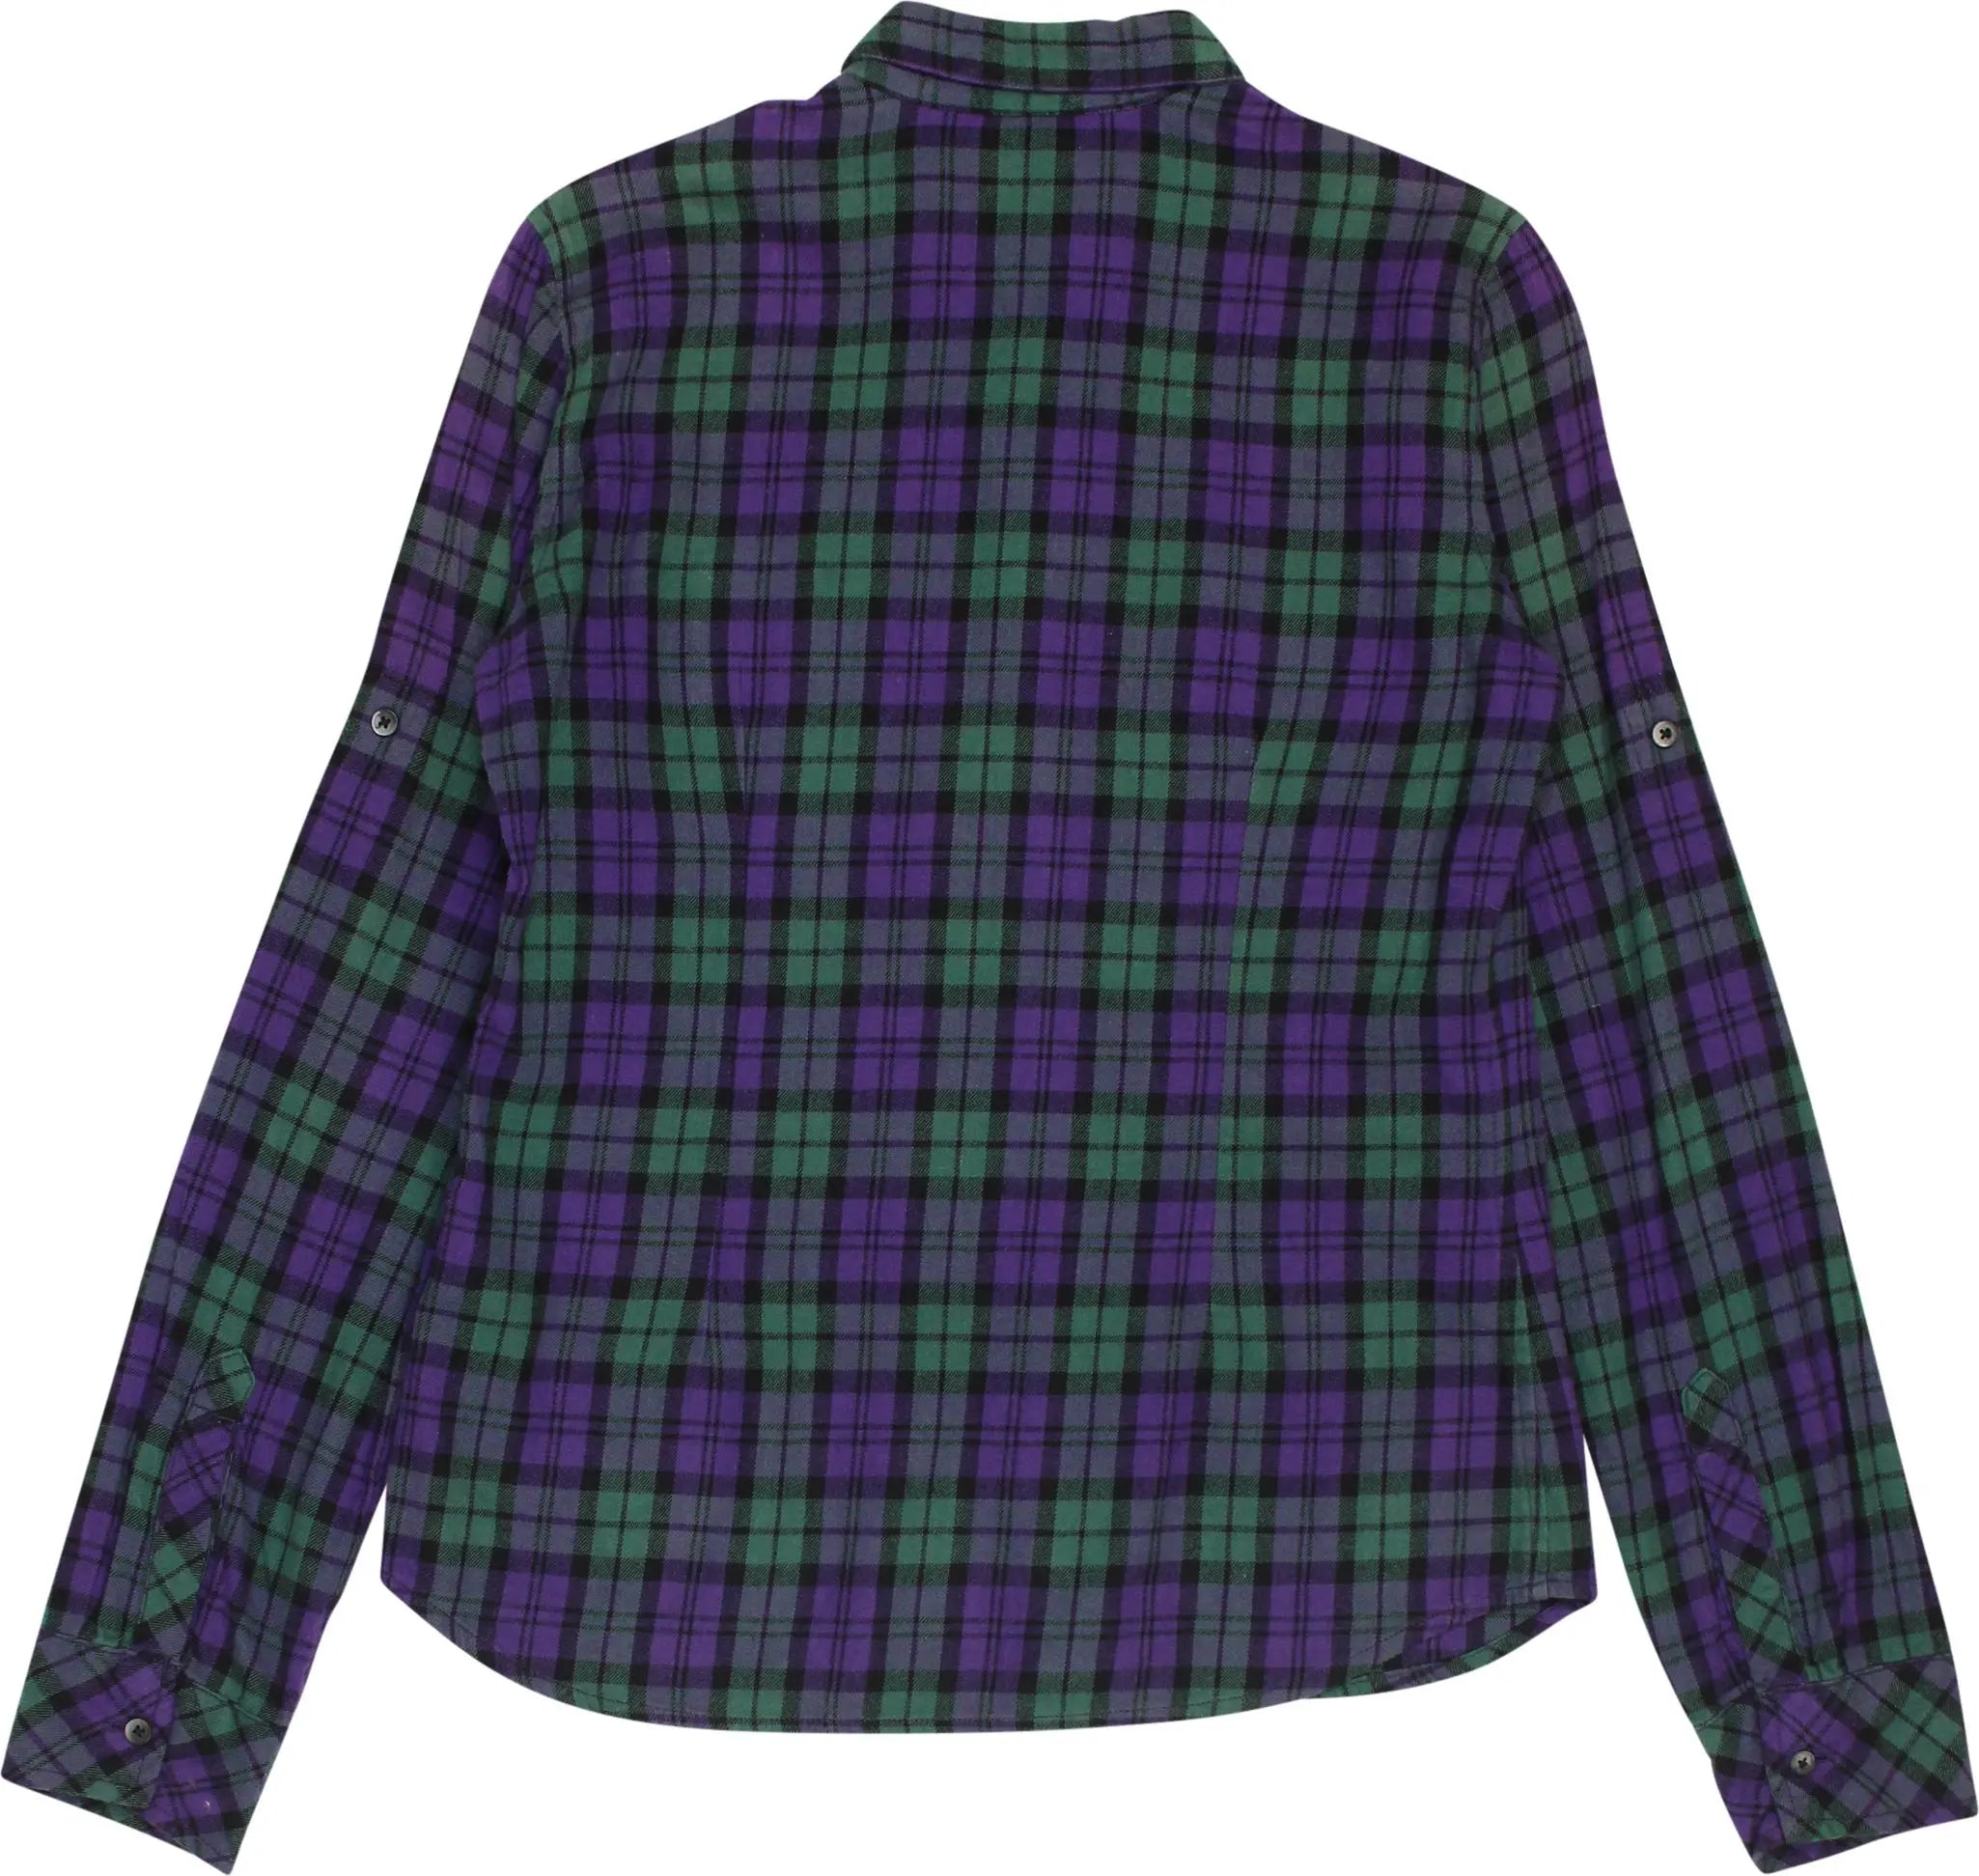 Carhartt - Checkered shirt by Carhartt- ThriftTale.com - Vintage and second handclothing